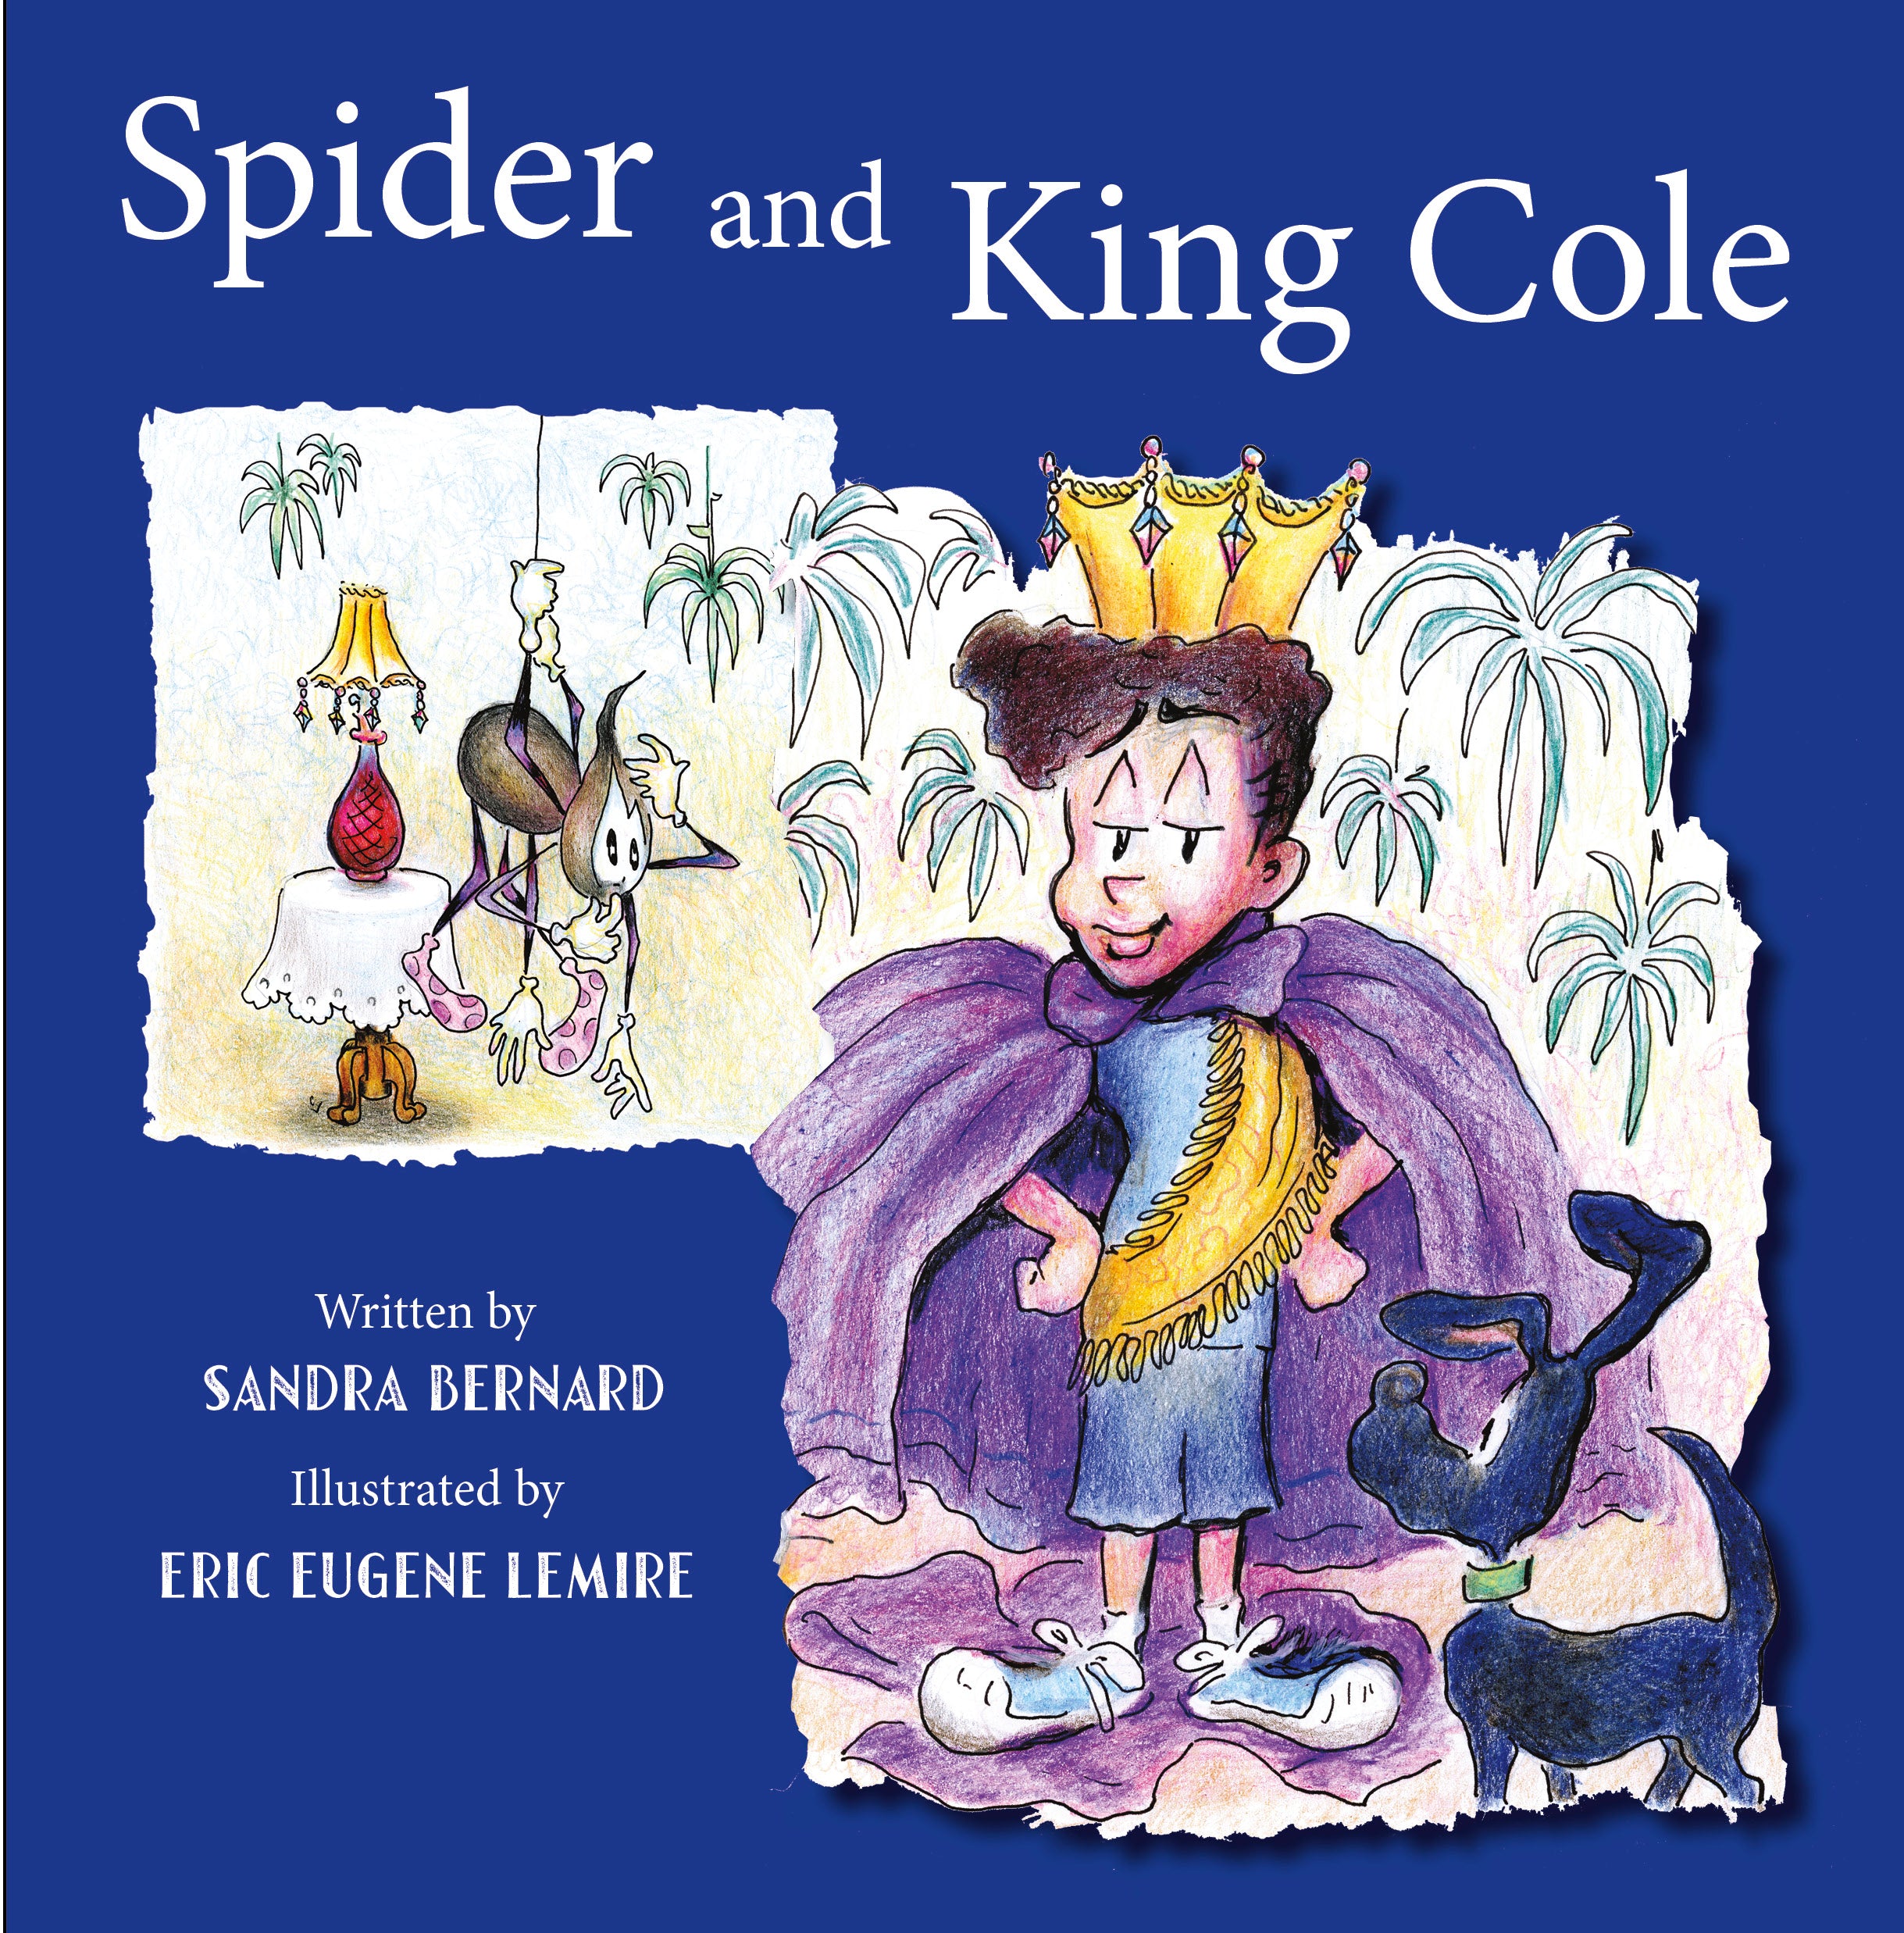 Spider and King Cole